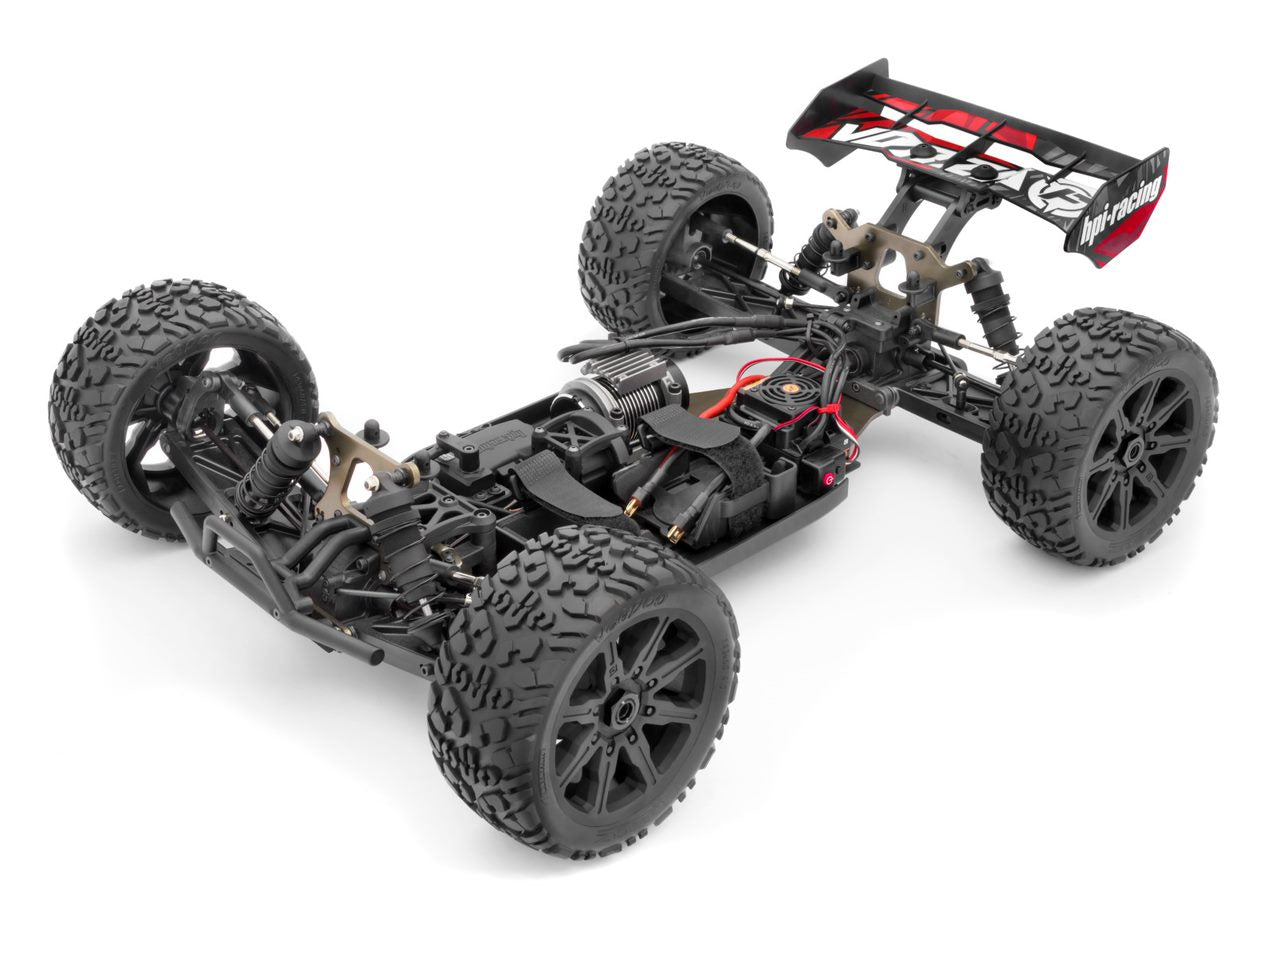 Vorza Truggy Flux RTR, 1/8 Scale, 4WD, Brushless ESC, w/ 2.4GHz Radio System, Red - H y p e z RC